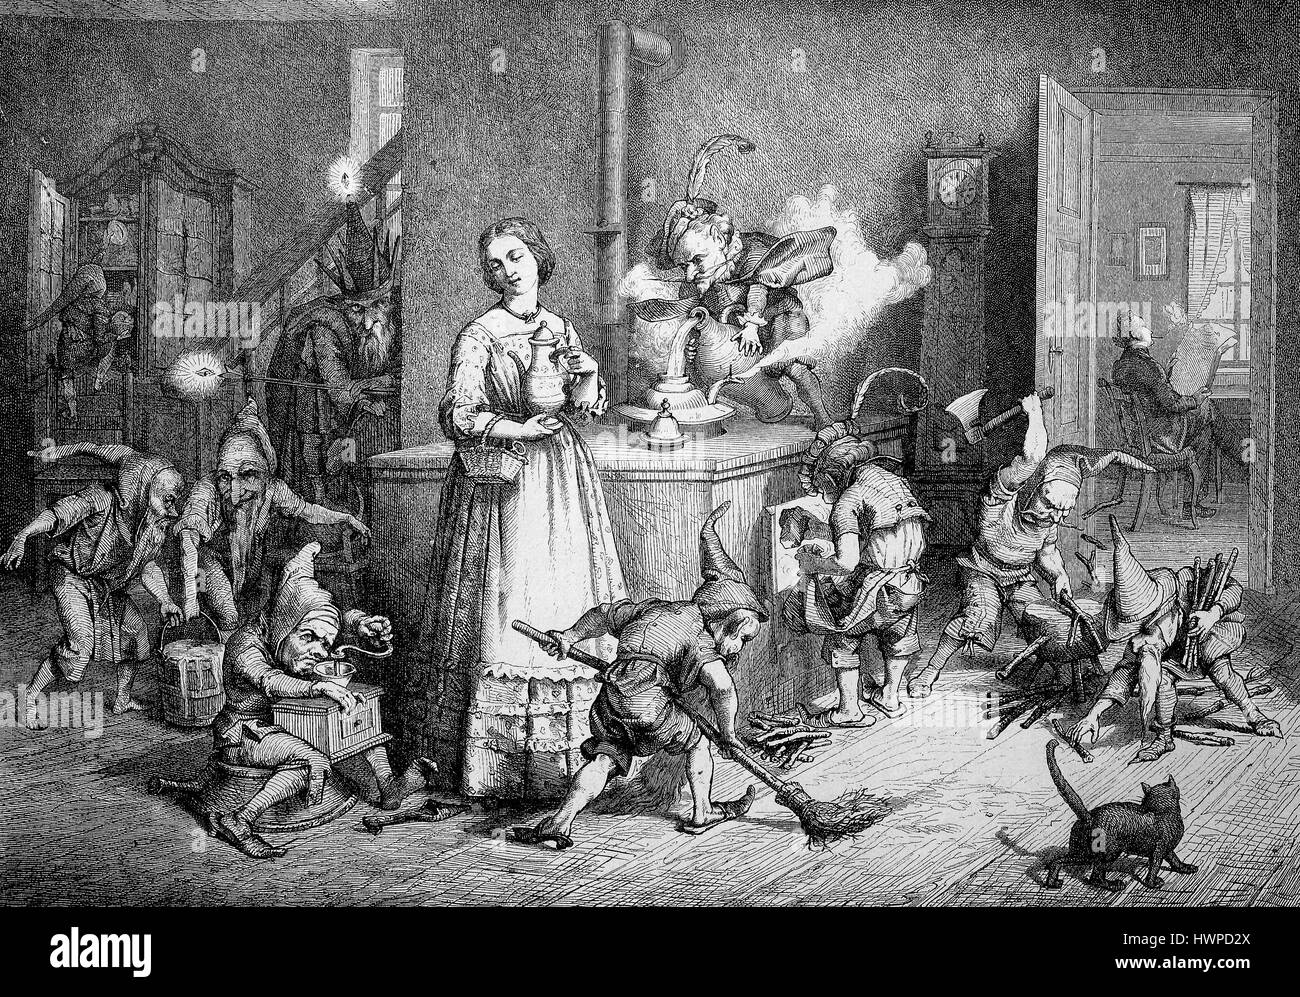 King Heinzelmann with Anna in the kitchen. The Heinzelmaennchen, brownie was according to legend Cologne House spirits. You were doing at night, when people were asleep, their work, Germany, Reproduction of an original woodcut from the year 1882, digital improved Stock Photo